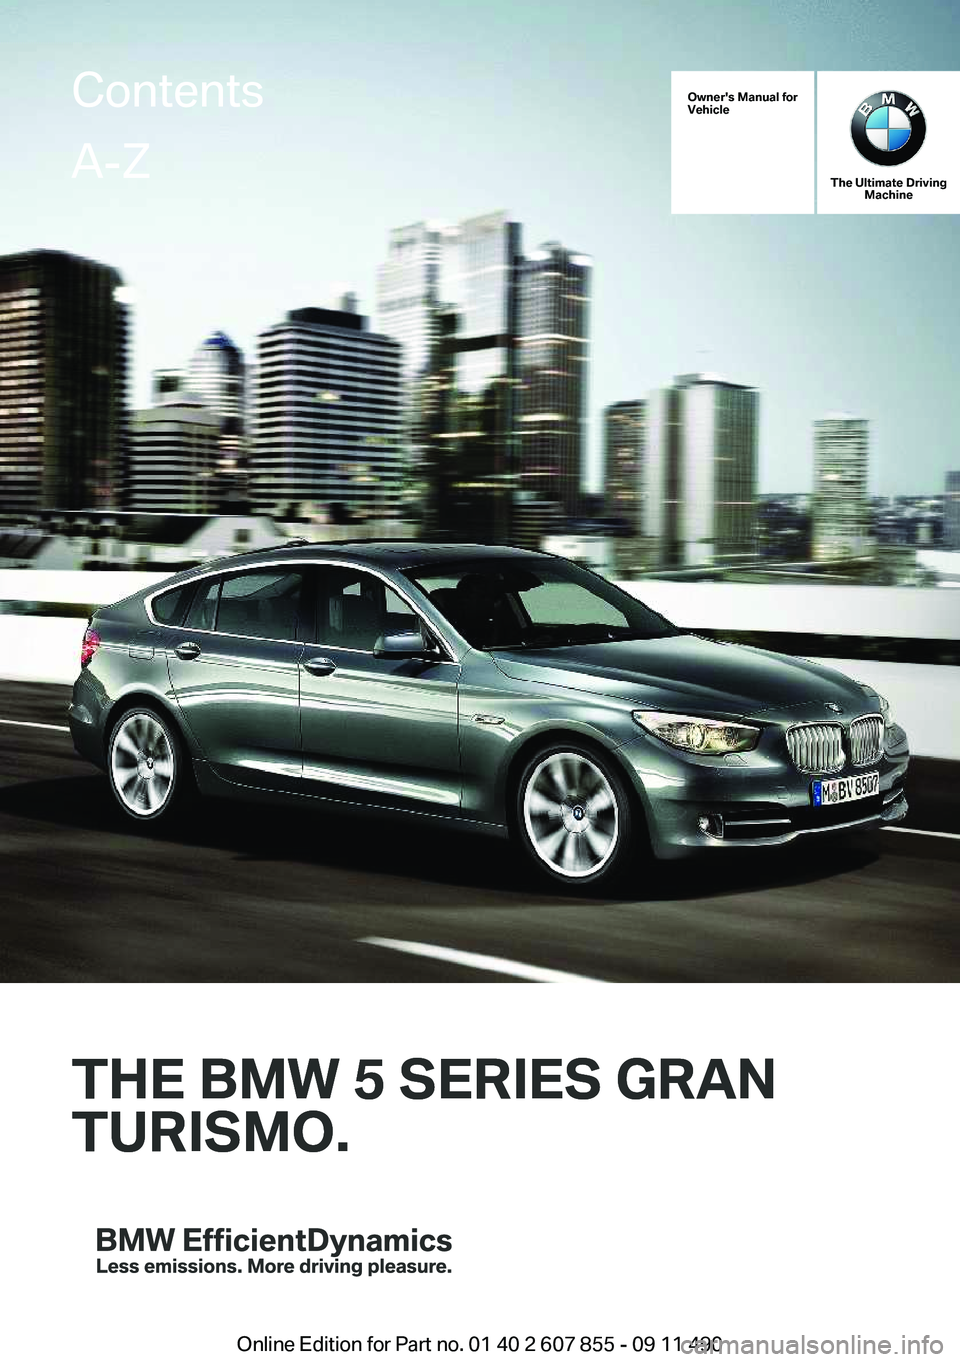 BMW 550I XDRIVE GRAN TURISMO 2012  Owners Manual Owner's Manual for
Vehicle
THE BMW 5 SERIES GRAN
TURISMO.
The Ultimate Driving Machine
THE BMW 5 SERIES GRAN
TURISMO.
ContentsA-Z
Online Edition for Part no. 01 40 2 607 855 - 09 11 490   